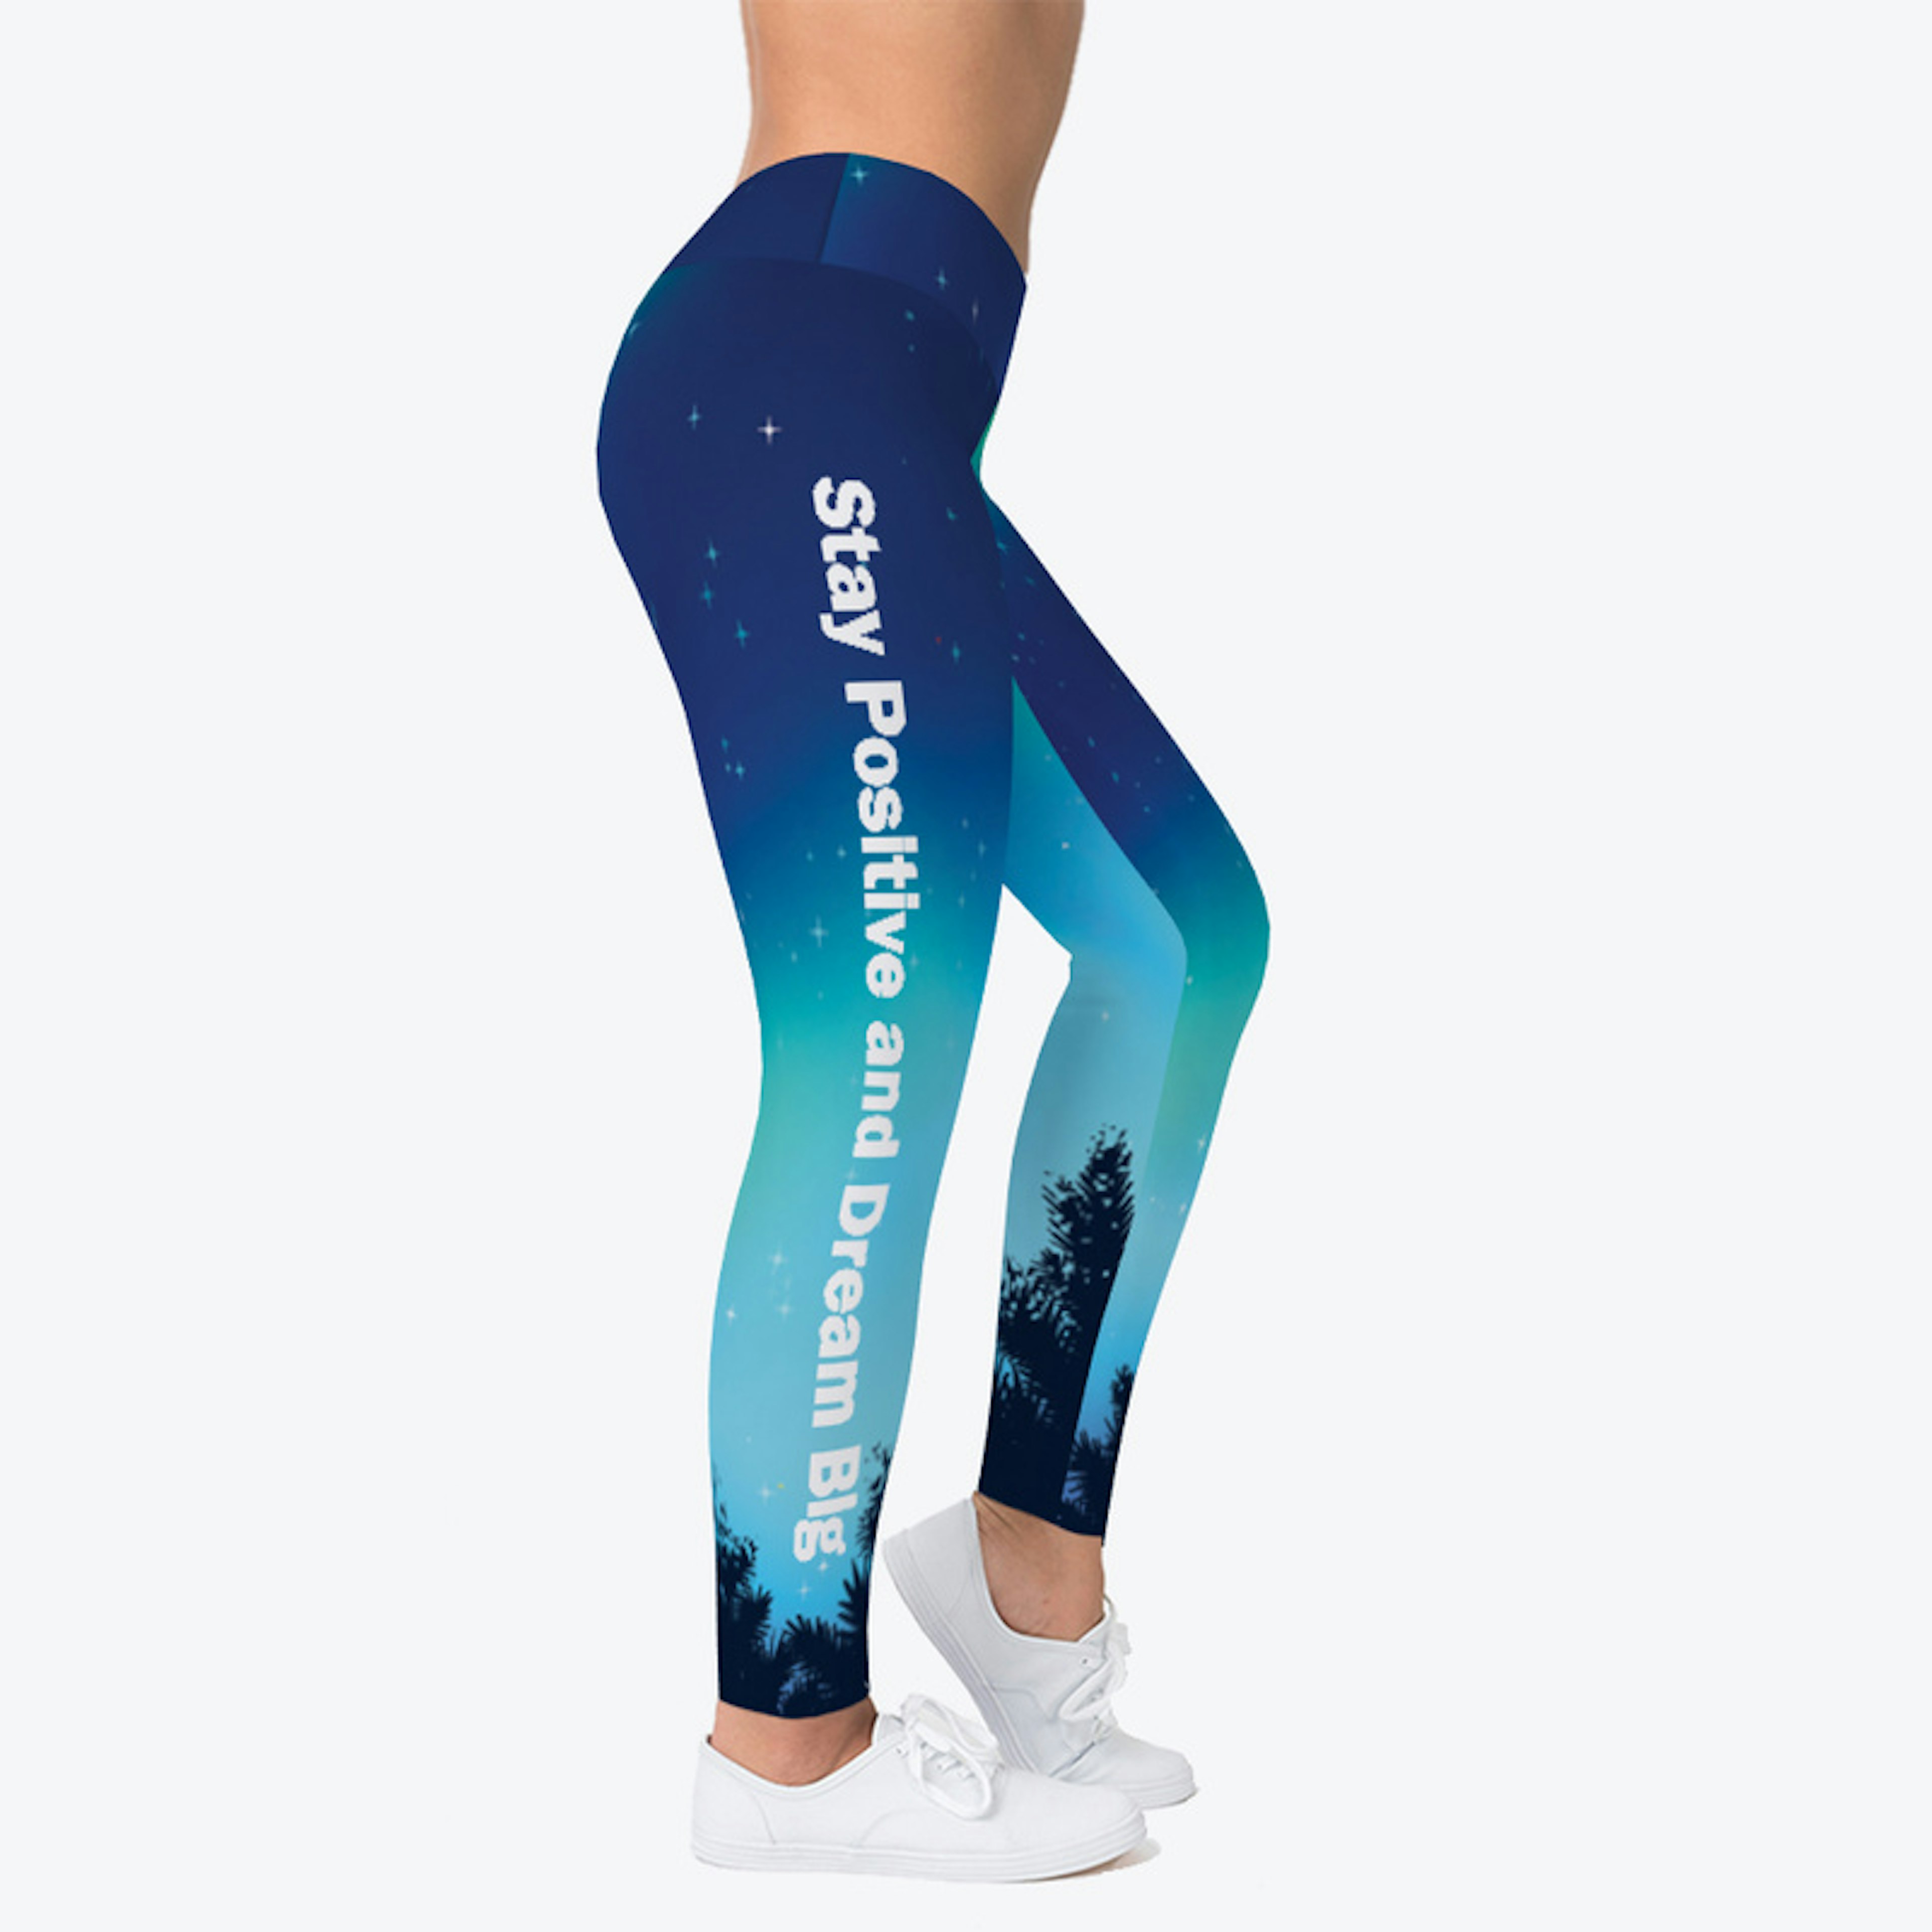 Stay Positive and Dream Big Leggings